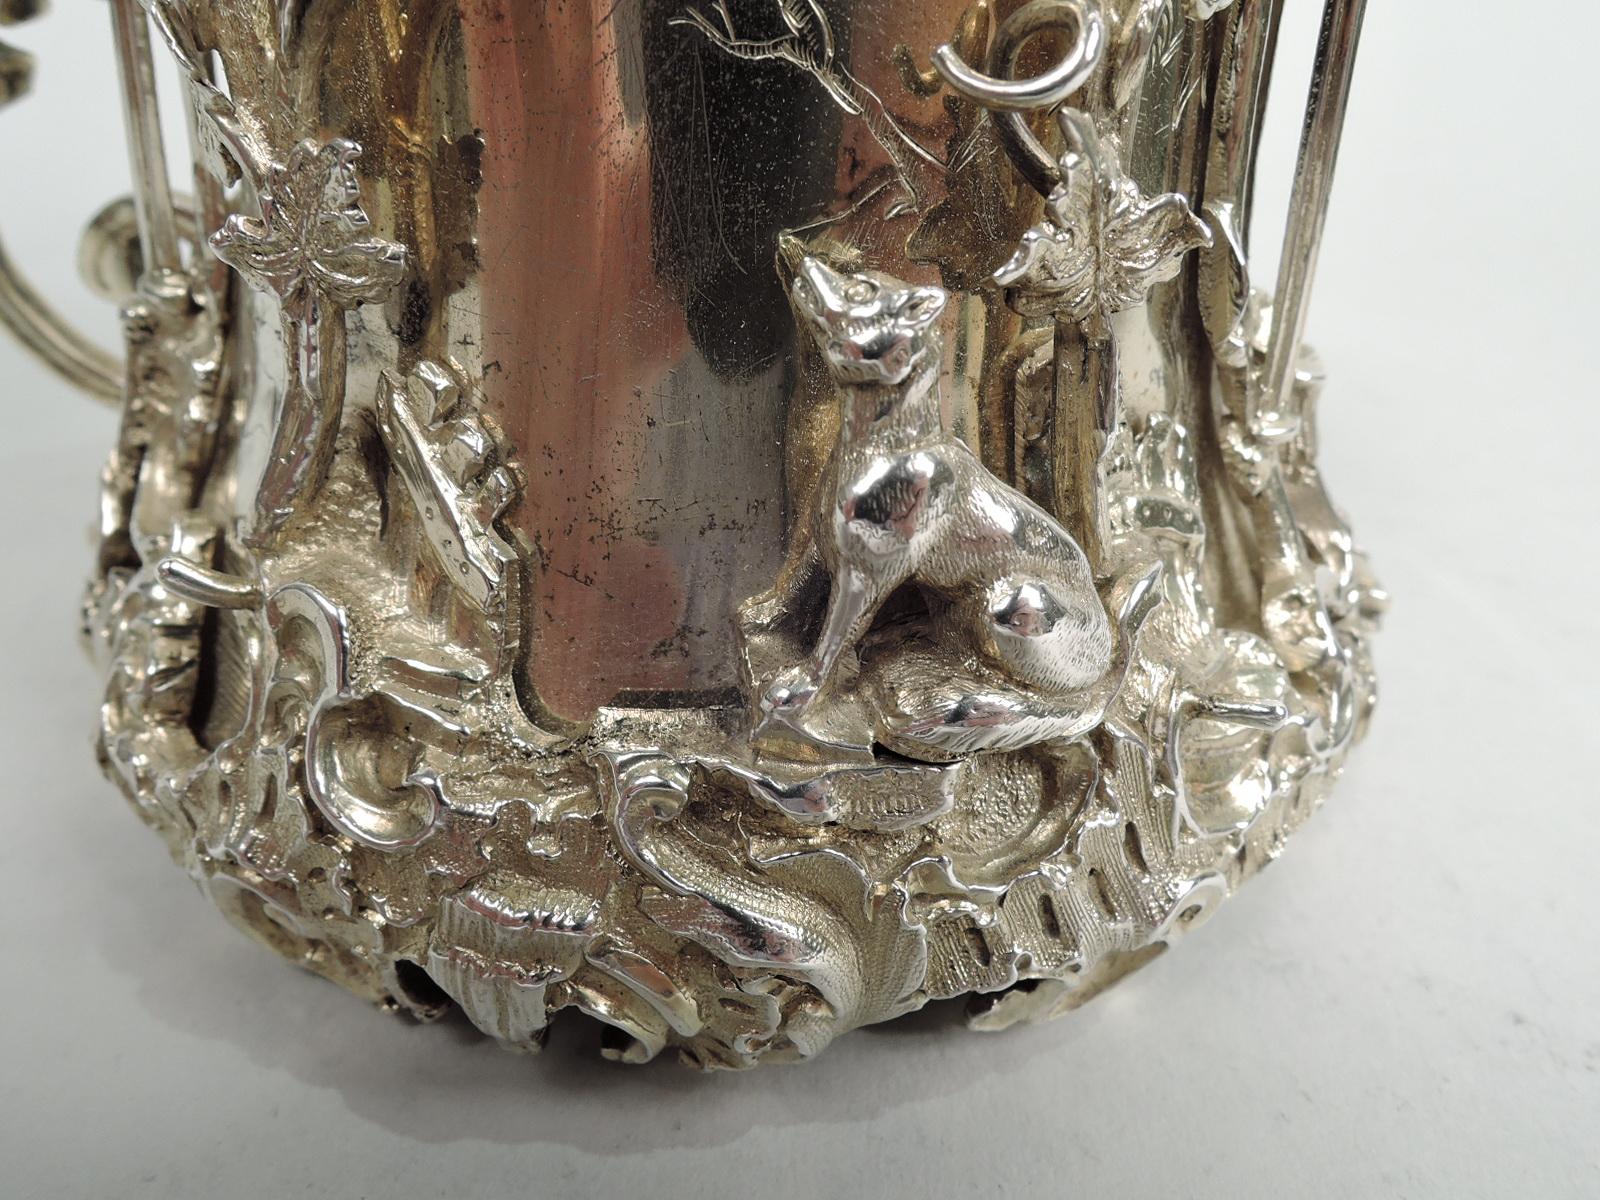 Finest Victorian Silver Gilt Christening Mug with Aesop’s Fables 1